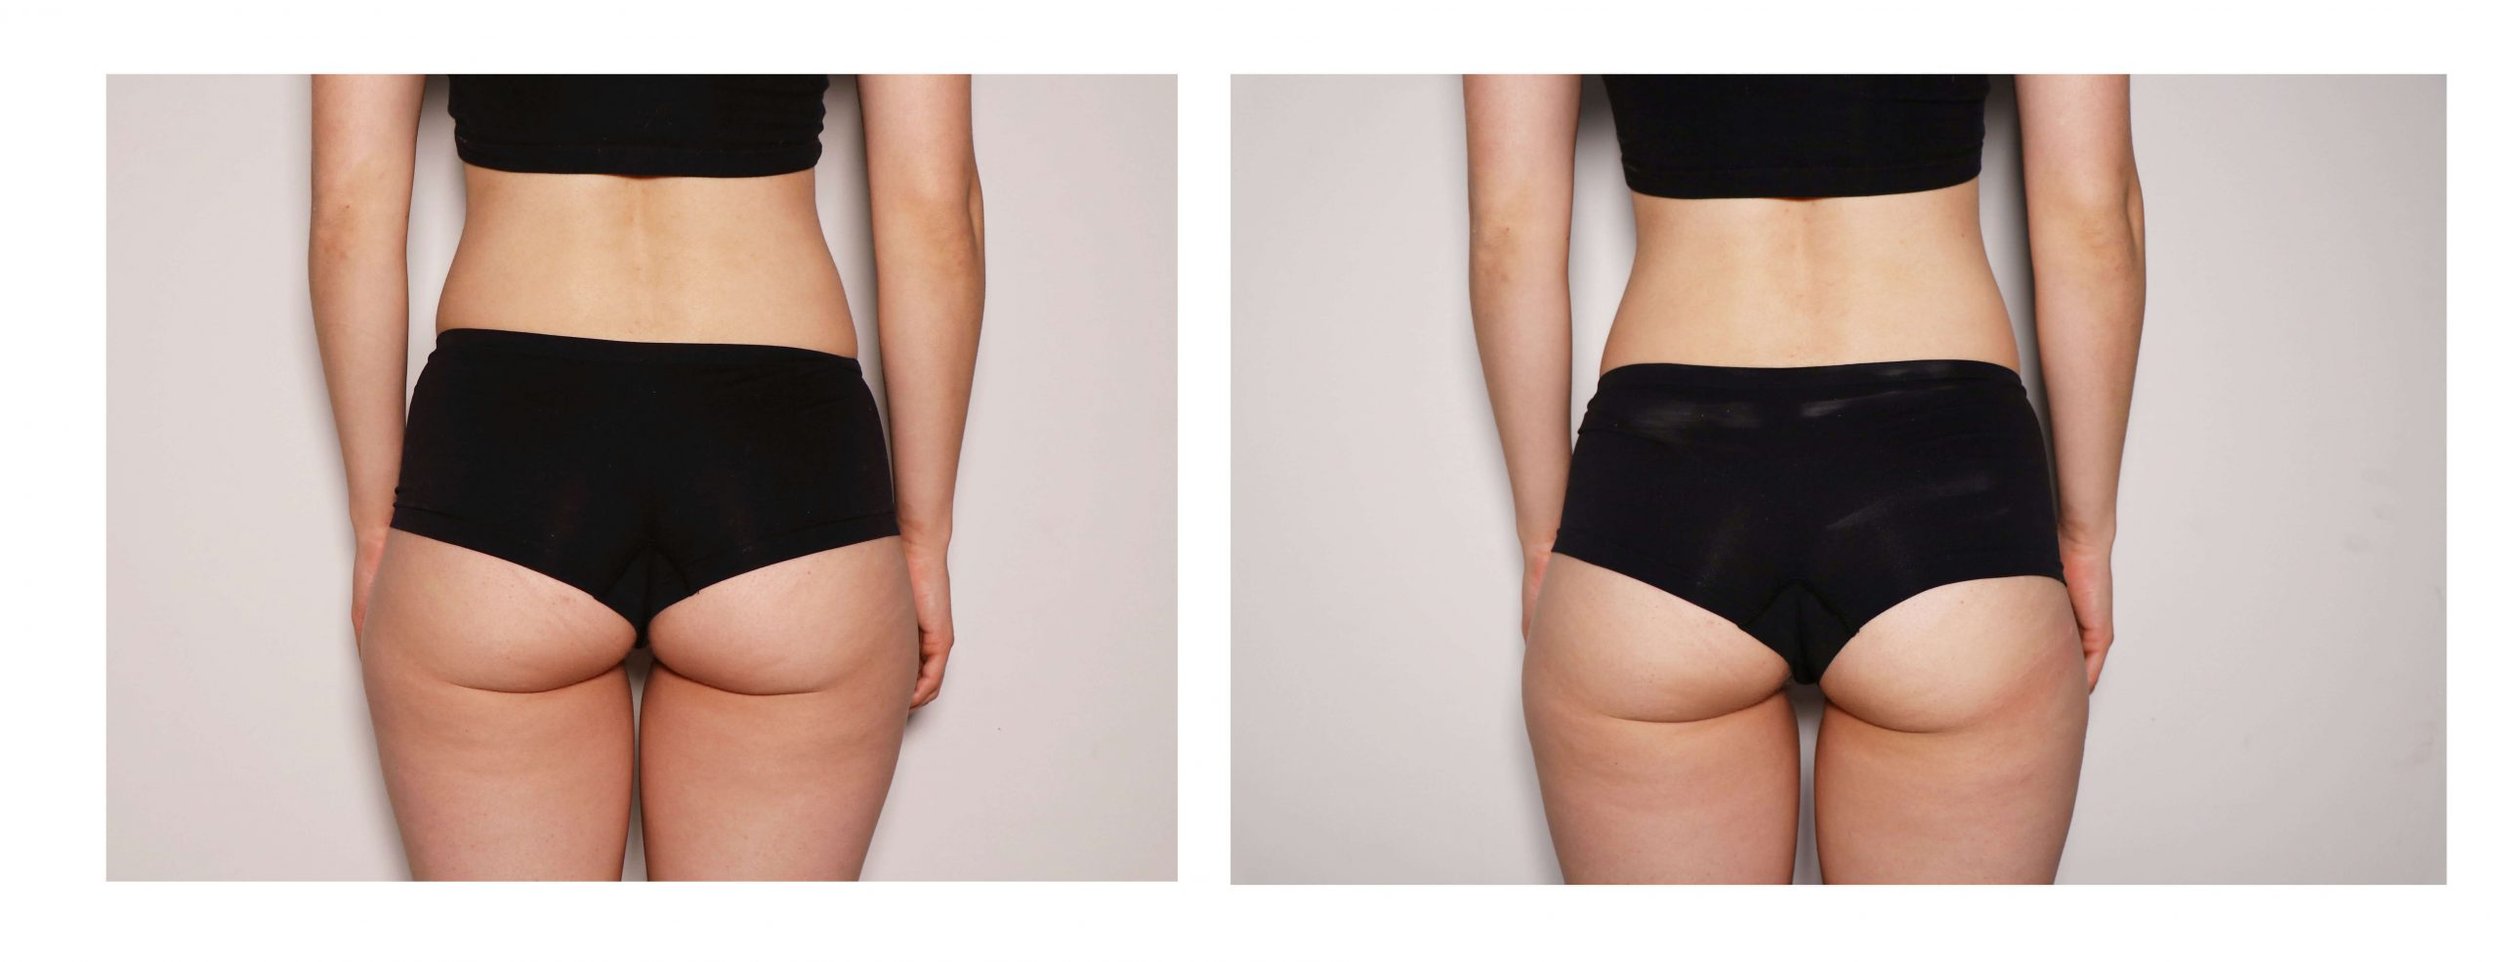 Female-Butt-Toning-Before-After-scaled.jpg